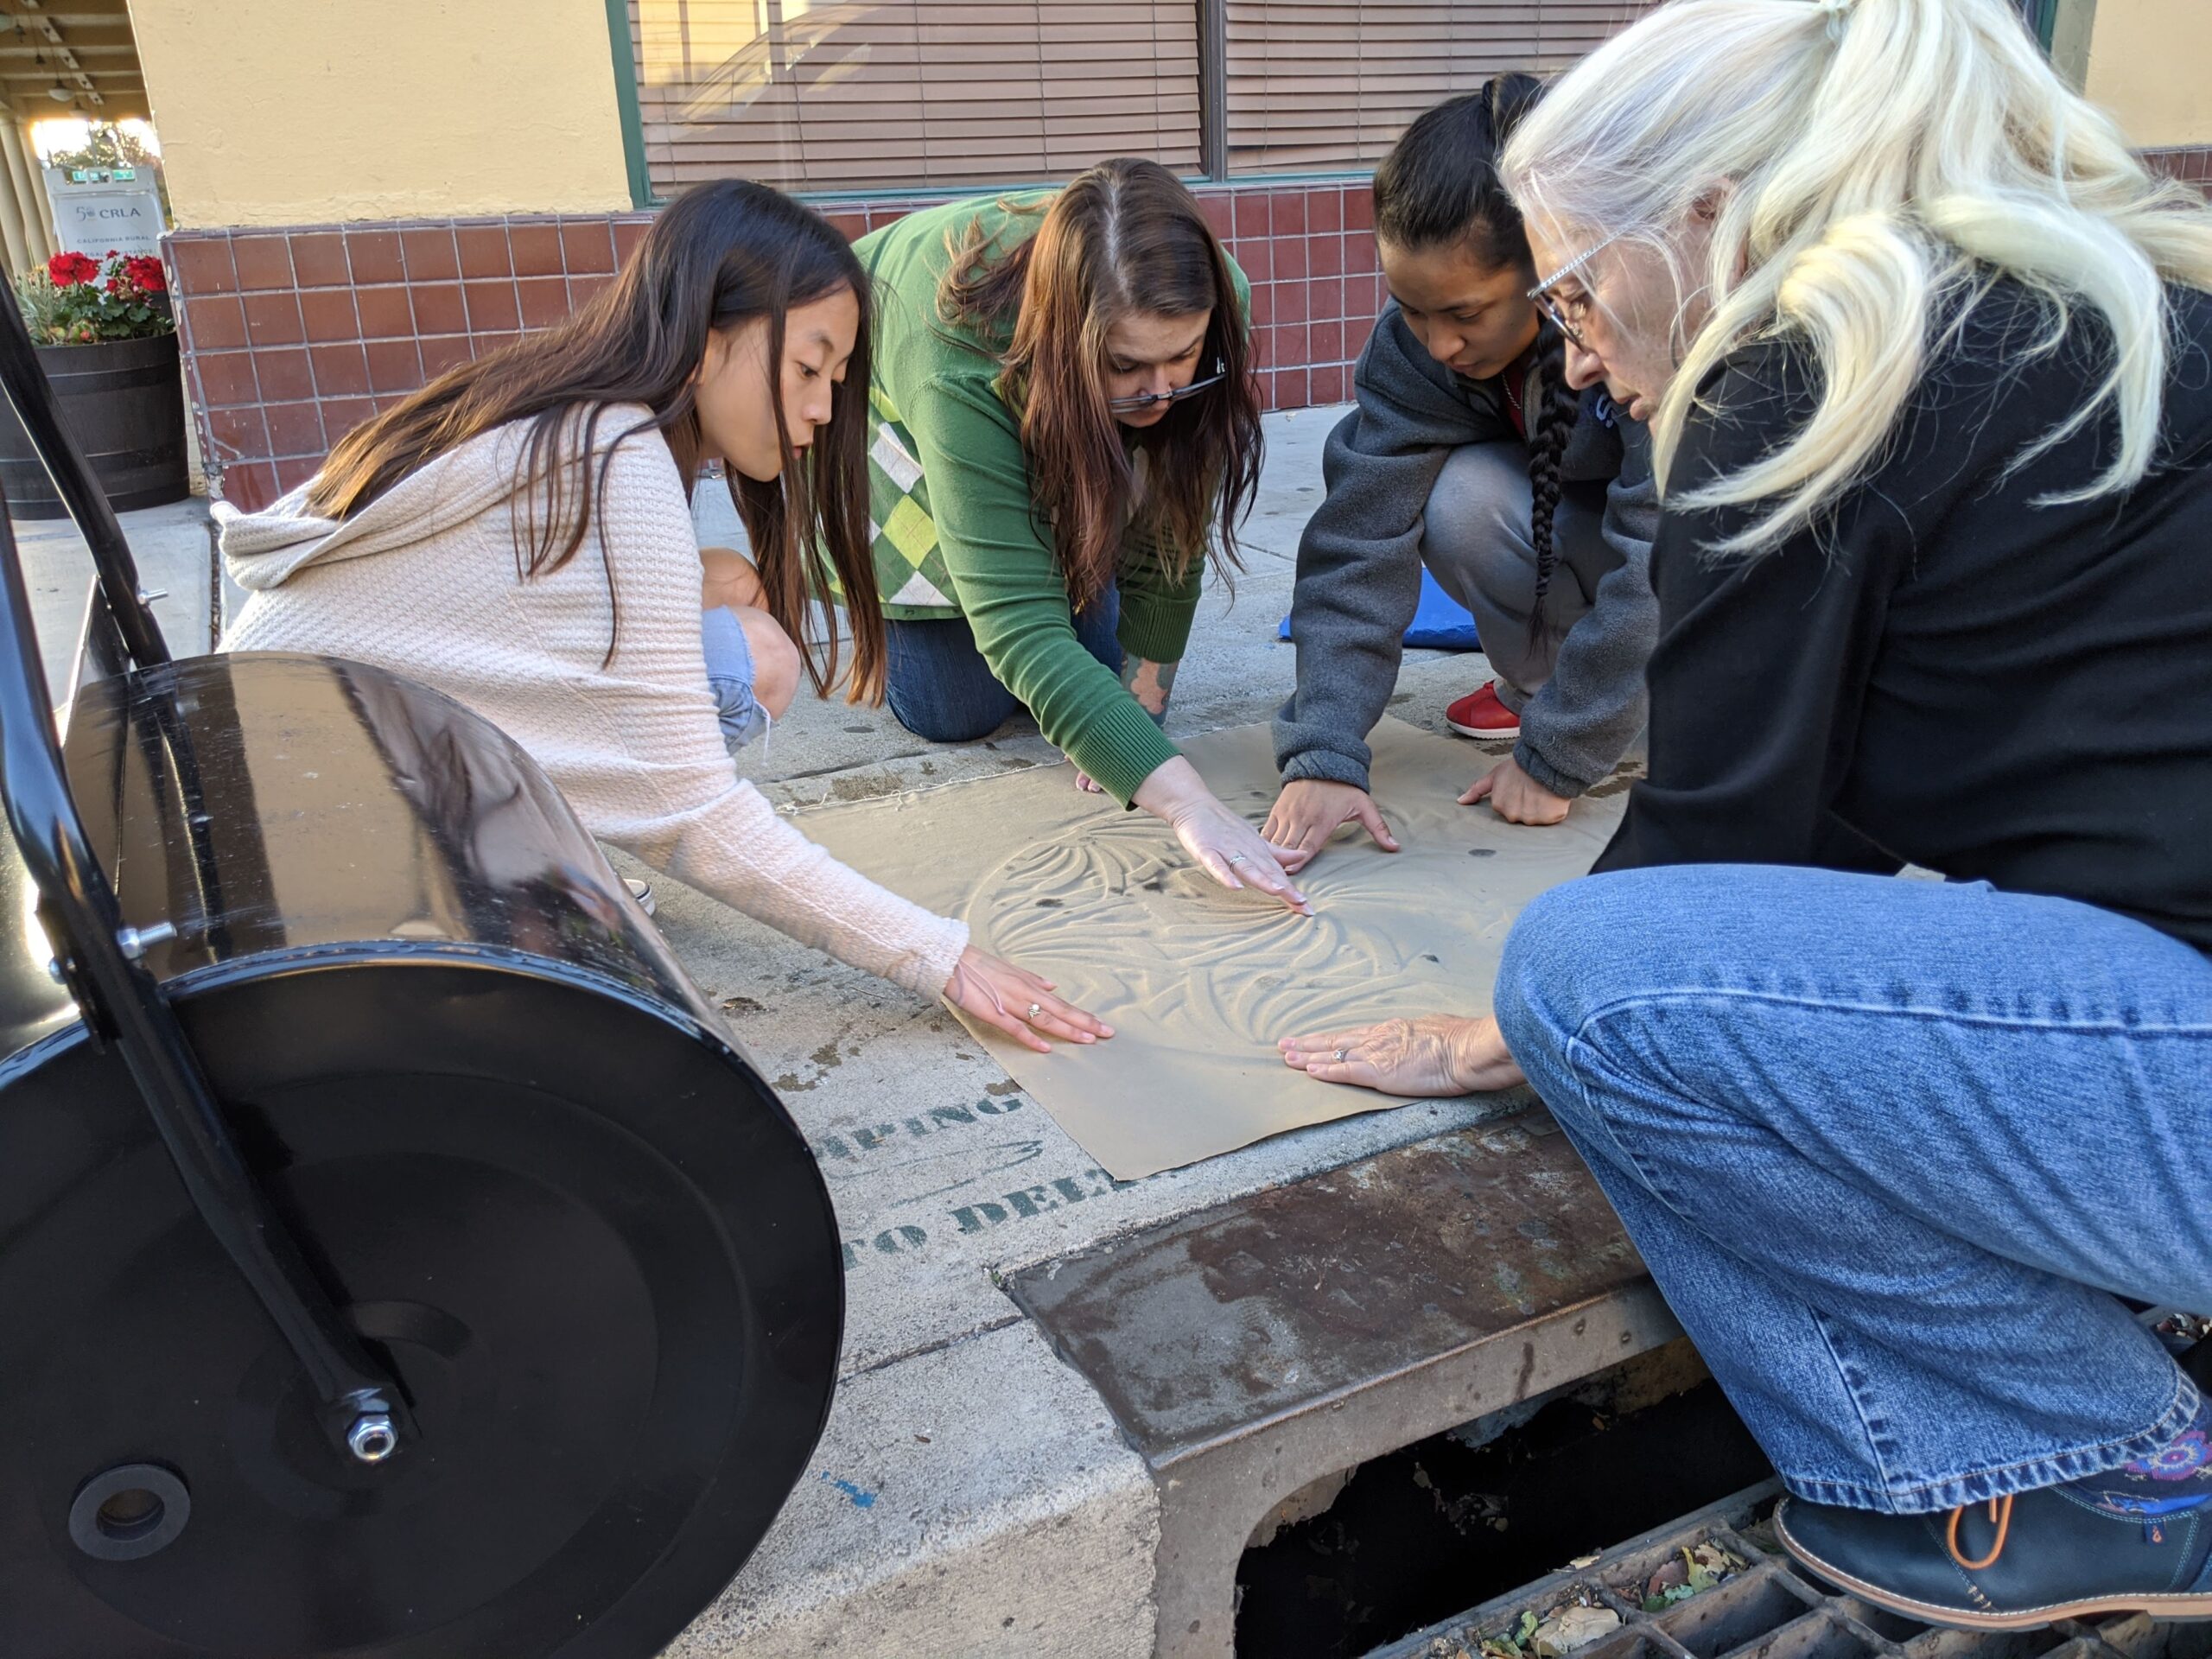 An image of Paula Sheil and a group of students doing manhole-cover art.